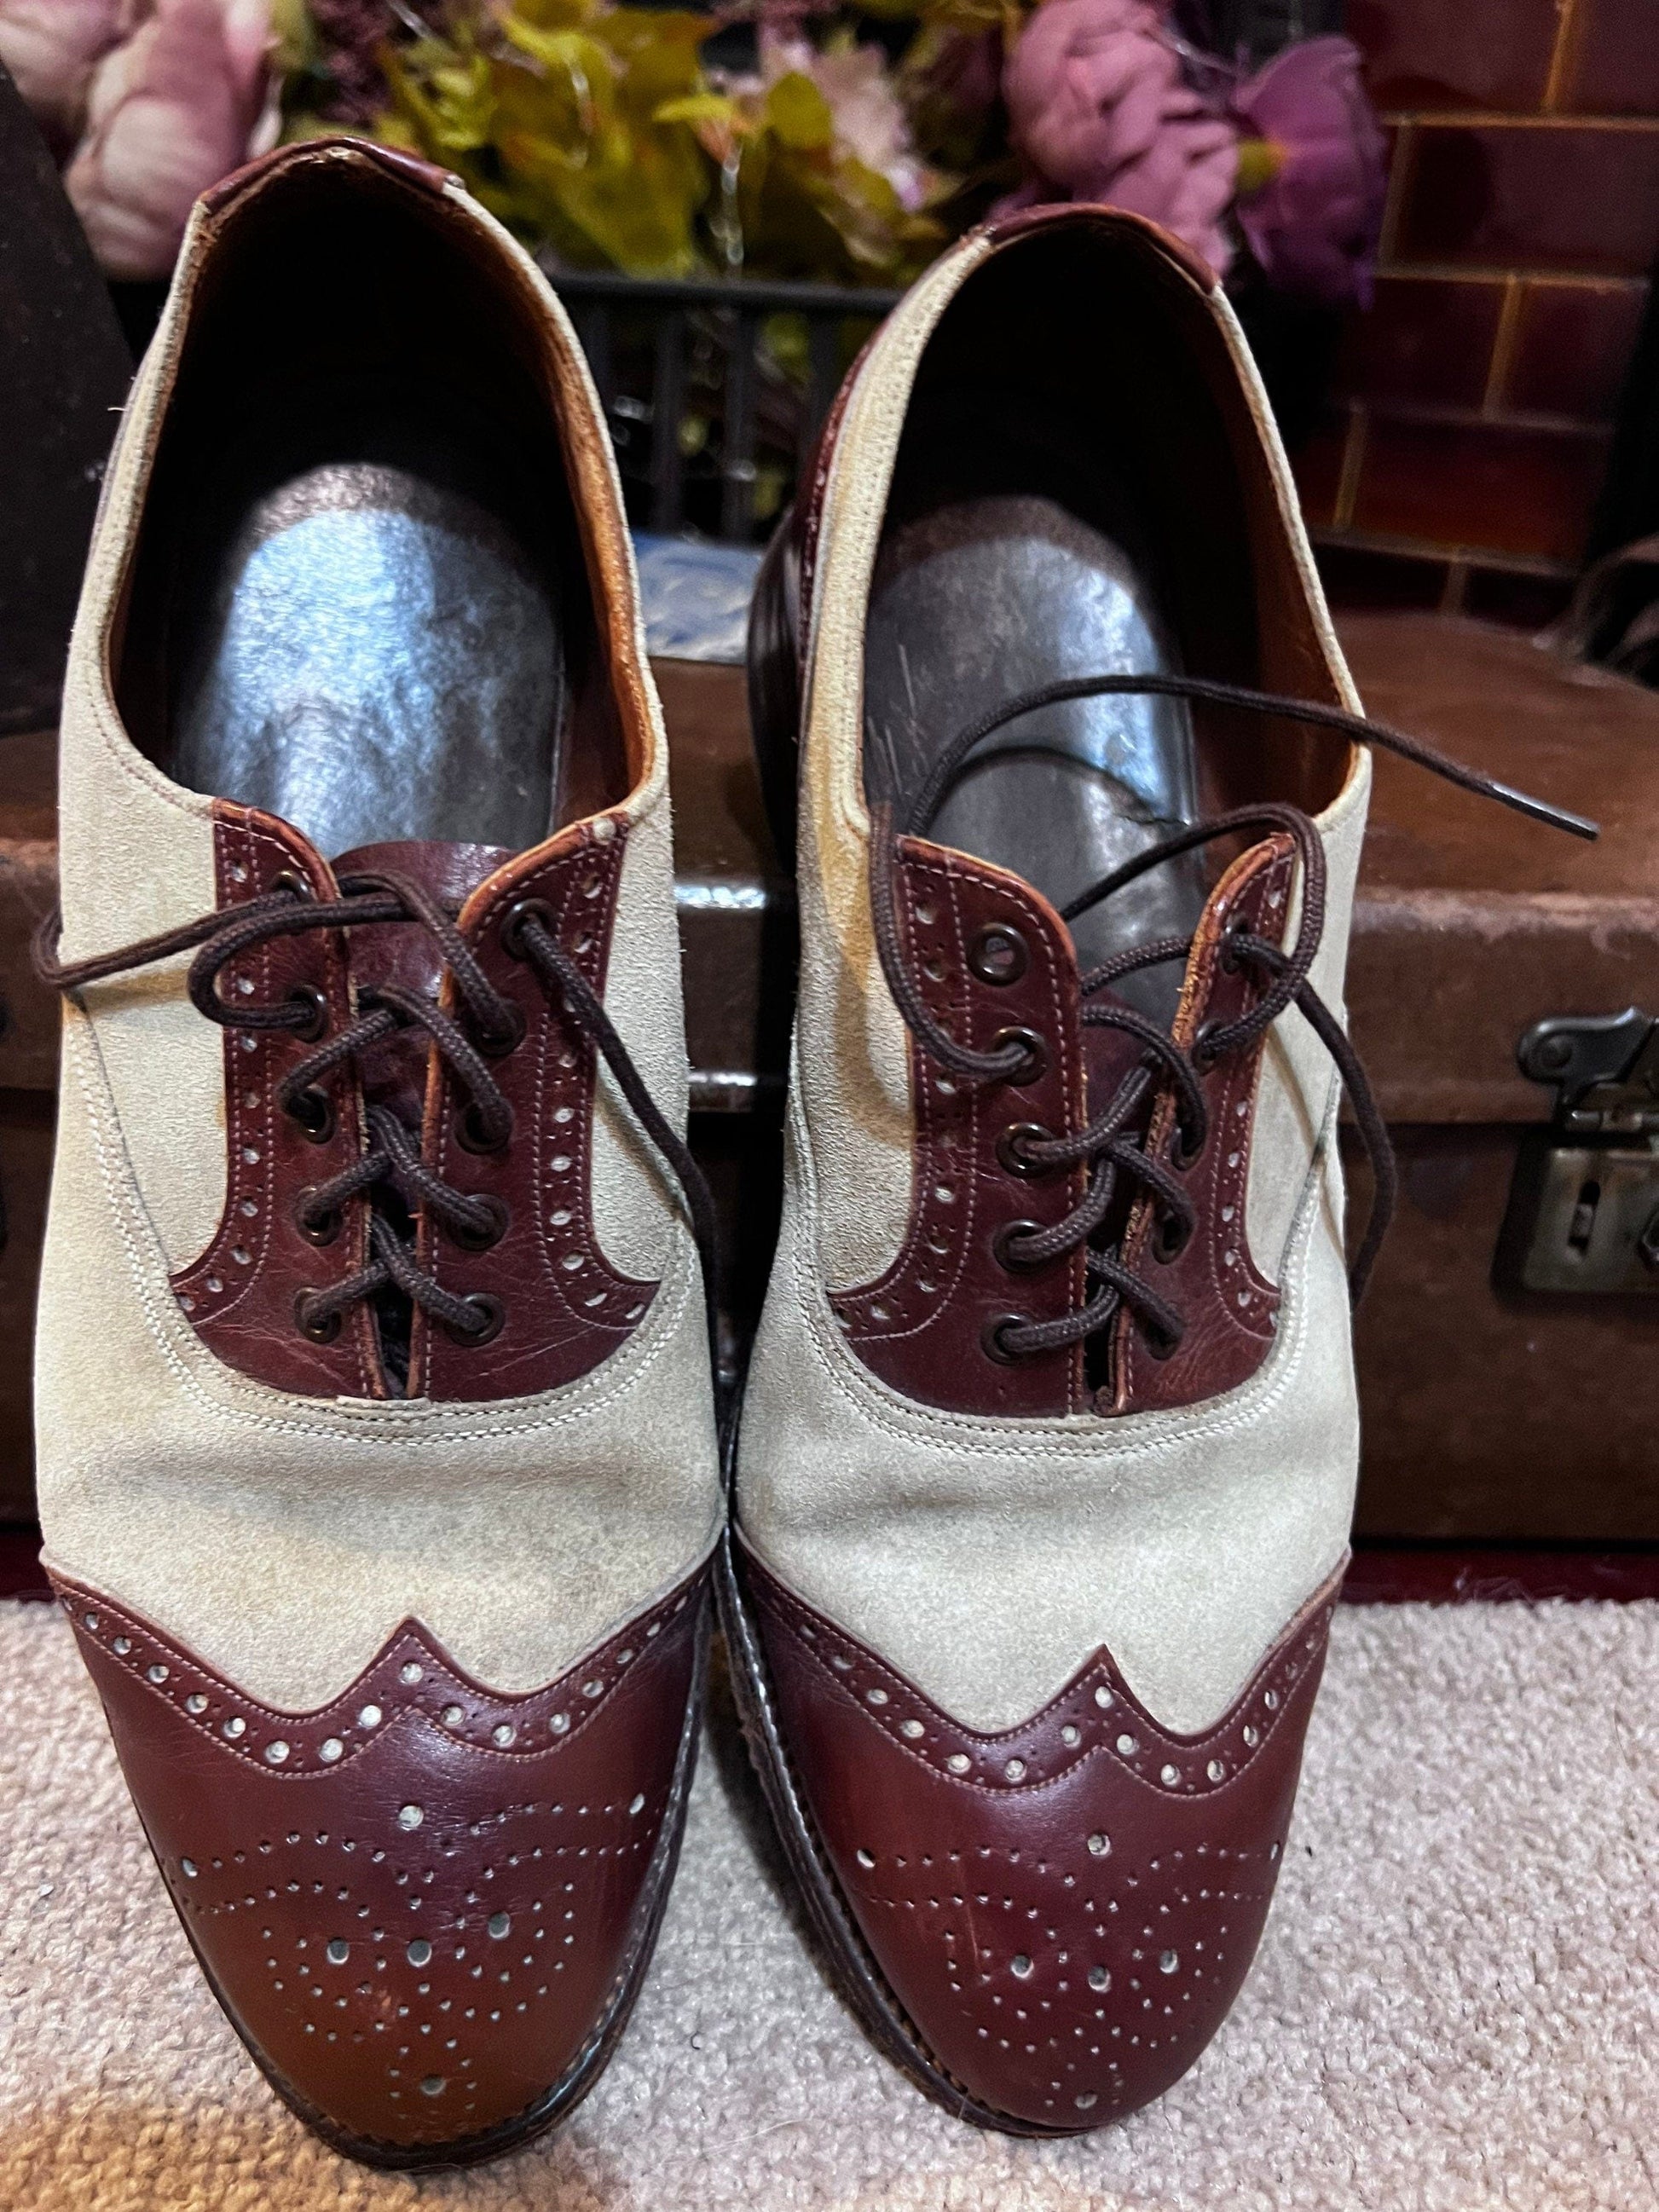 1940s 50s Vintage Shoes two tone Oxford Brown Vintage Lace up shoes Shoes UK 5 - Vintage Lace Ups - Vintage Shoes, 1940s  Leather, Brogues